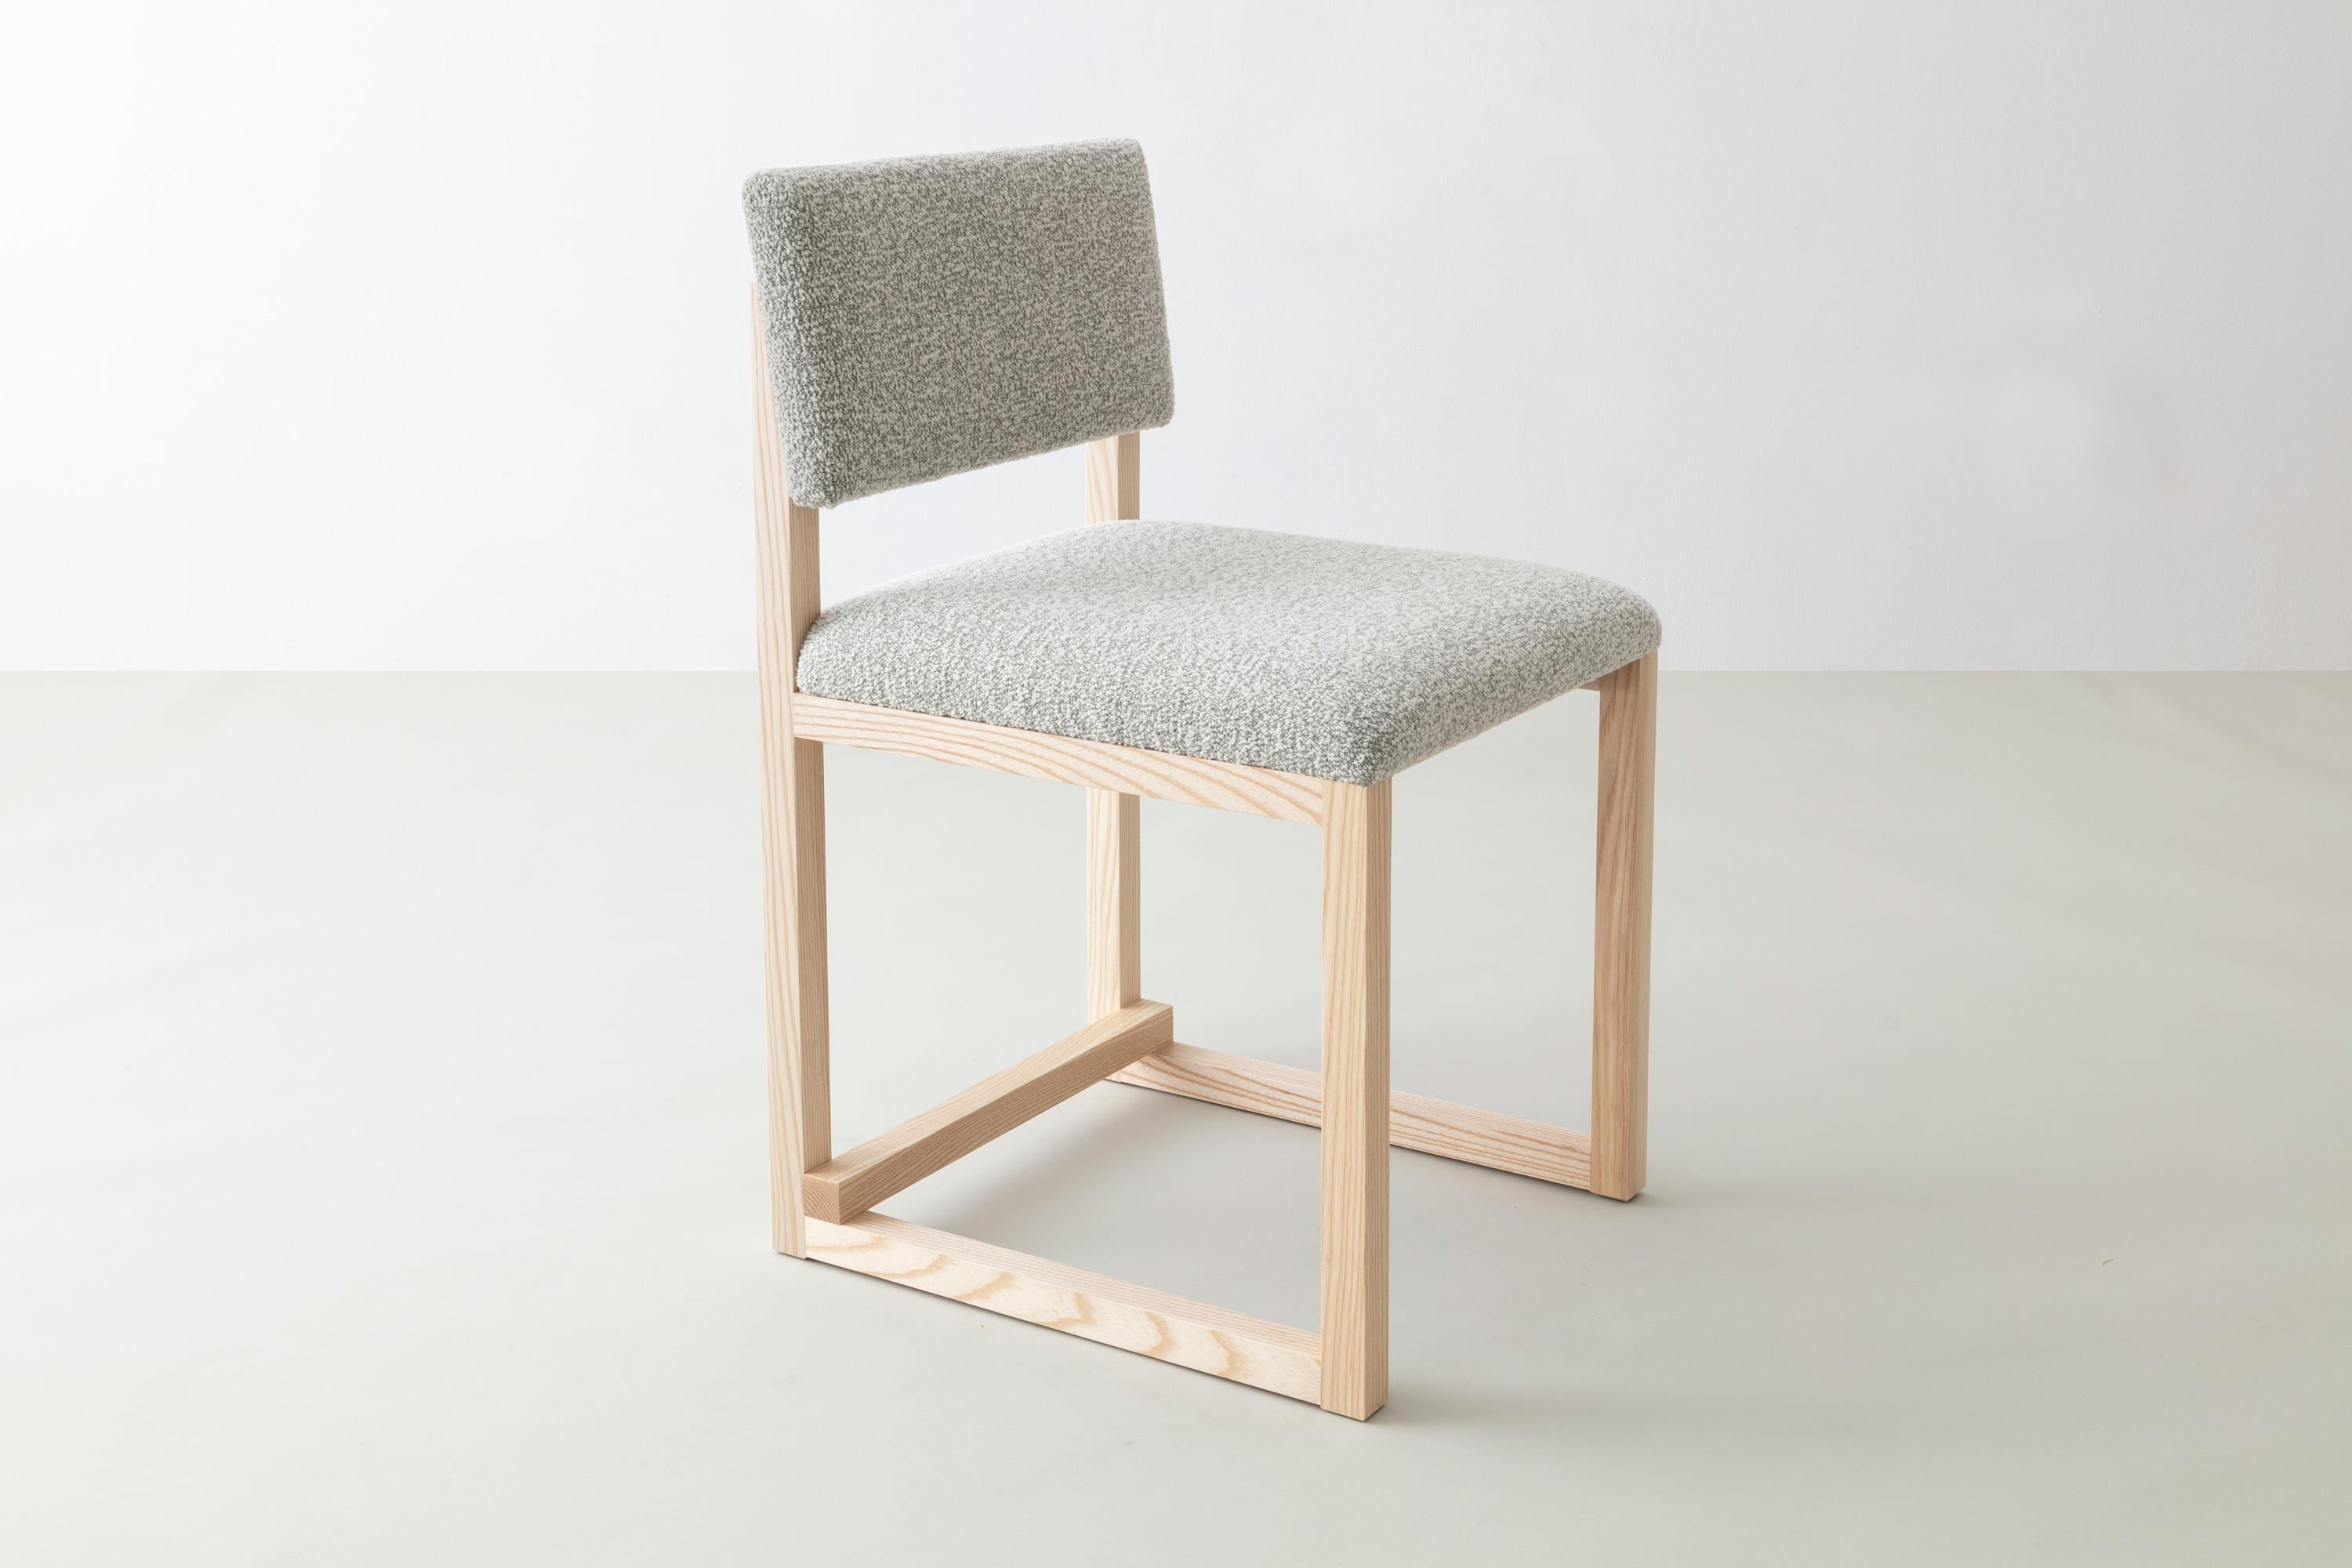 Shown in solid ash, bouclé wool, and brushed brass hardware
 
Available with:
Wood in ash, cherry, maple, walnut, or white oak

Upholstery in customer’s own material or leather (COM+COL) 

Metal in brushed brass, antique brass, oil rubbed bronze, or